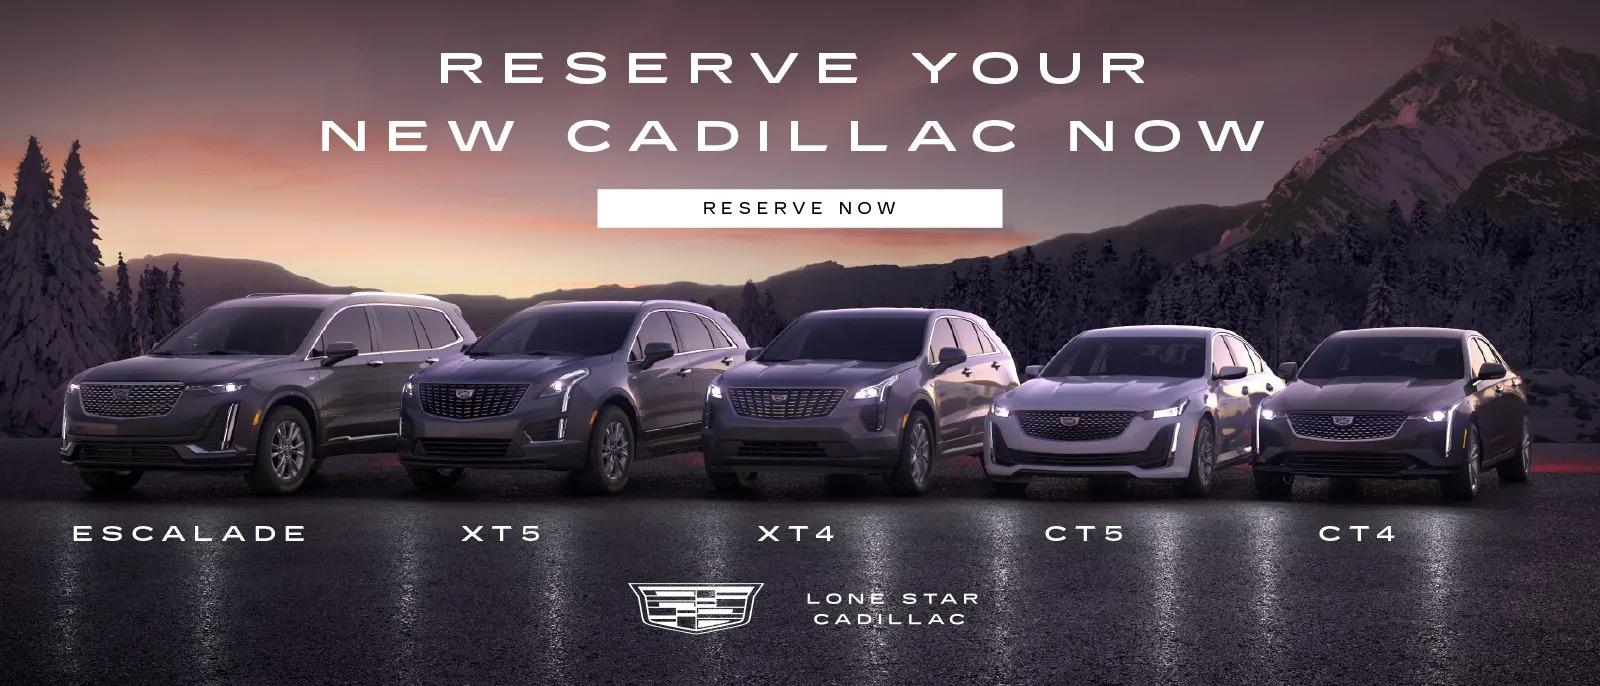 Reserve your Cadillac